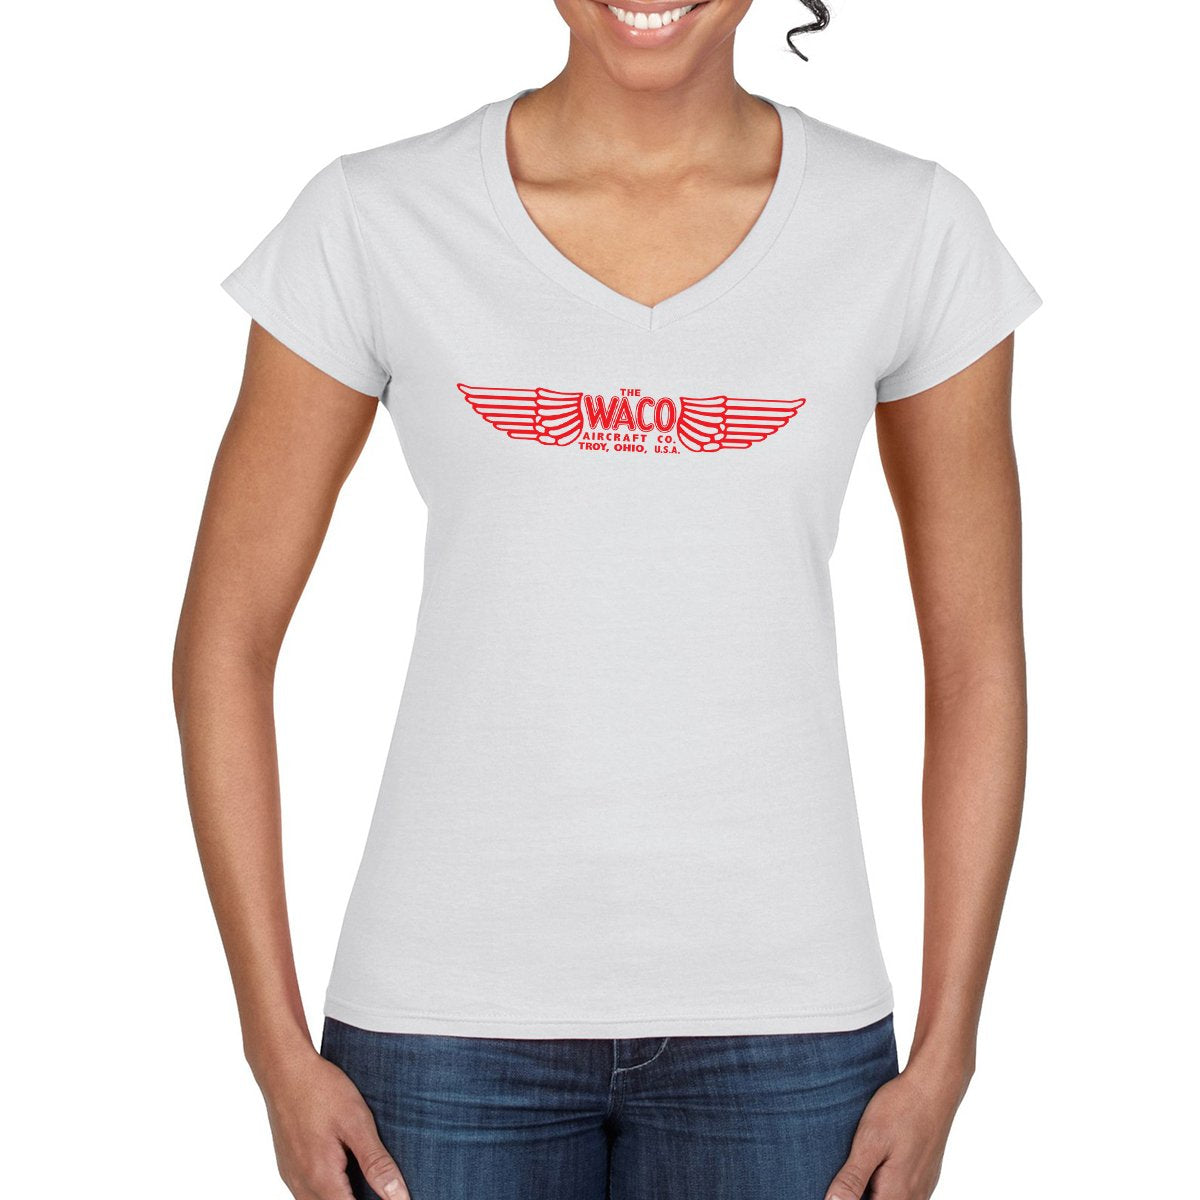 WACO AIRCRAFT CO Women's Vee Semi-Fitted T-Shirt